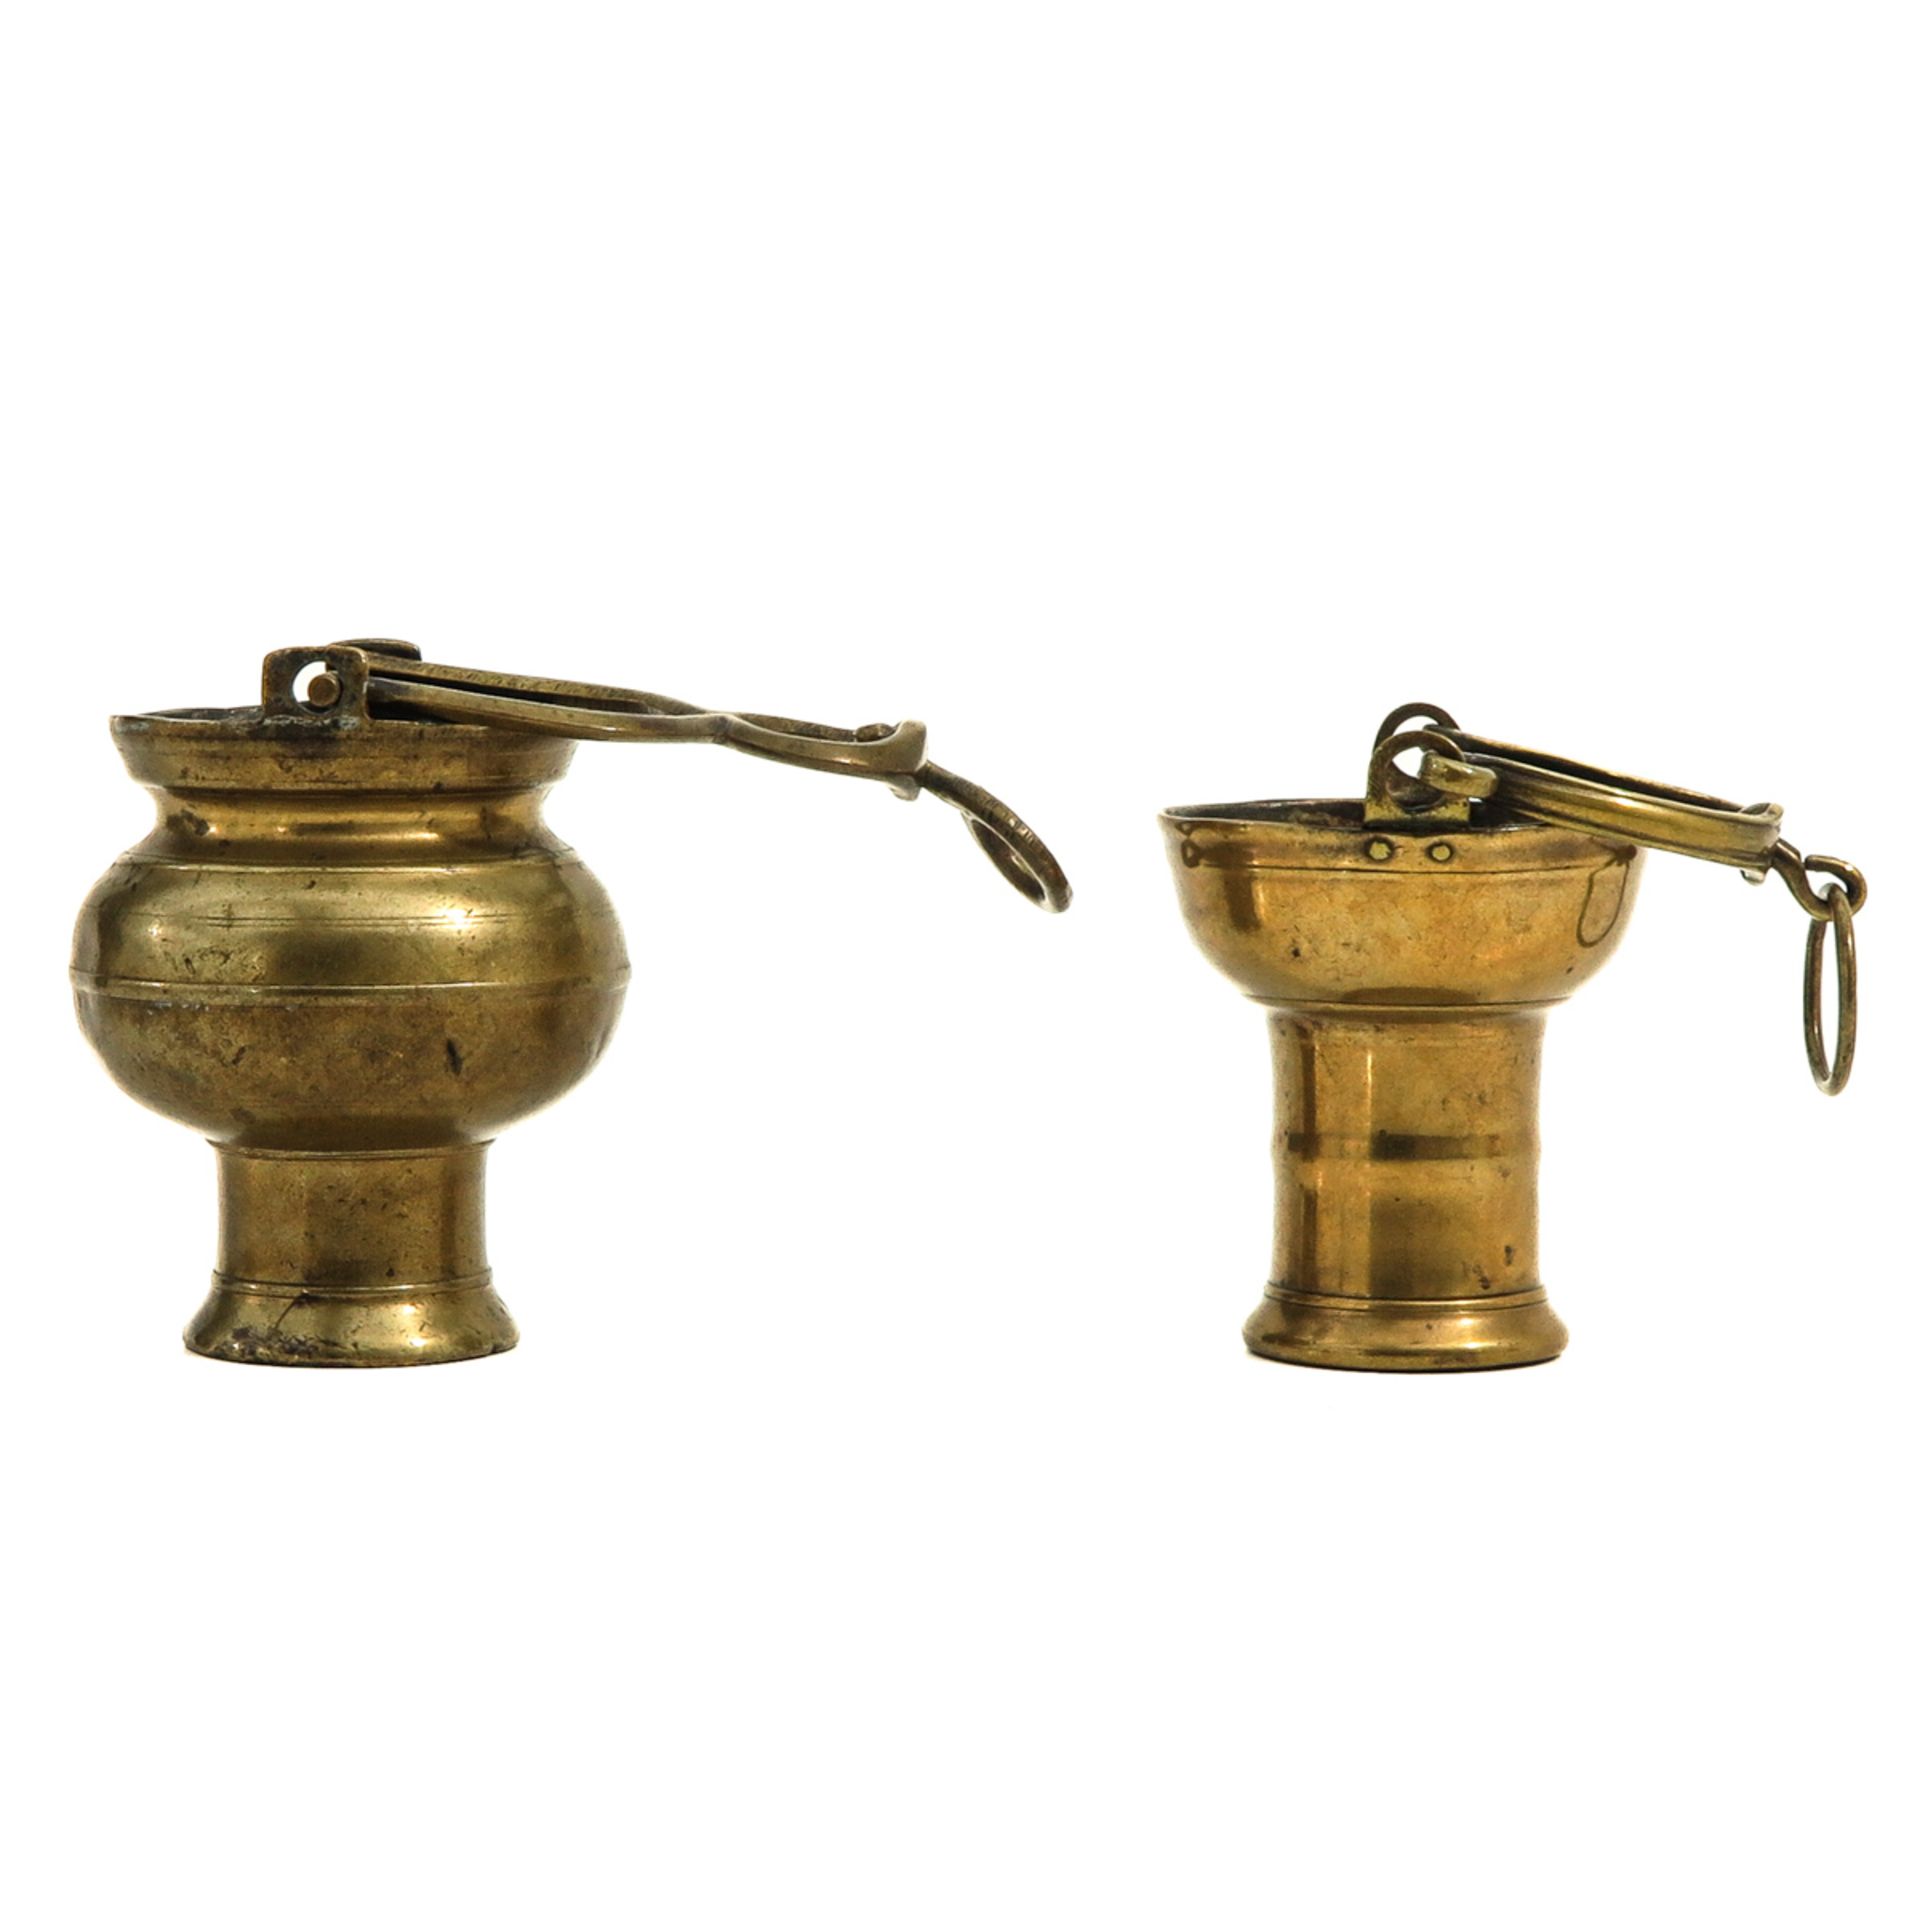 A Lot of 2 Bronze Holy Water Vessels - Image 2 of 8